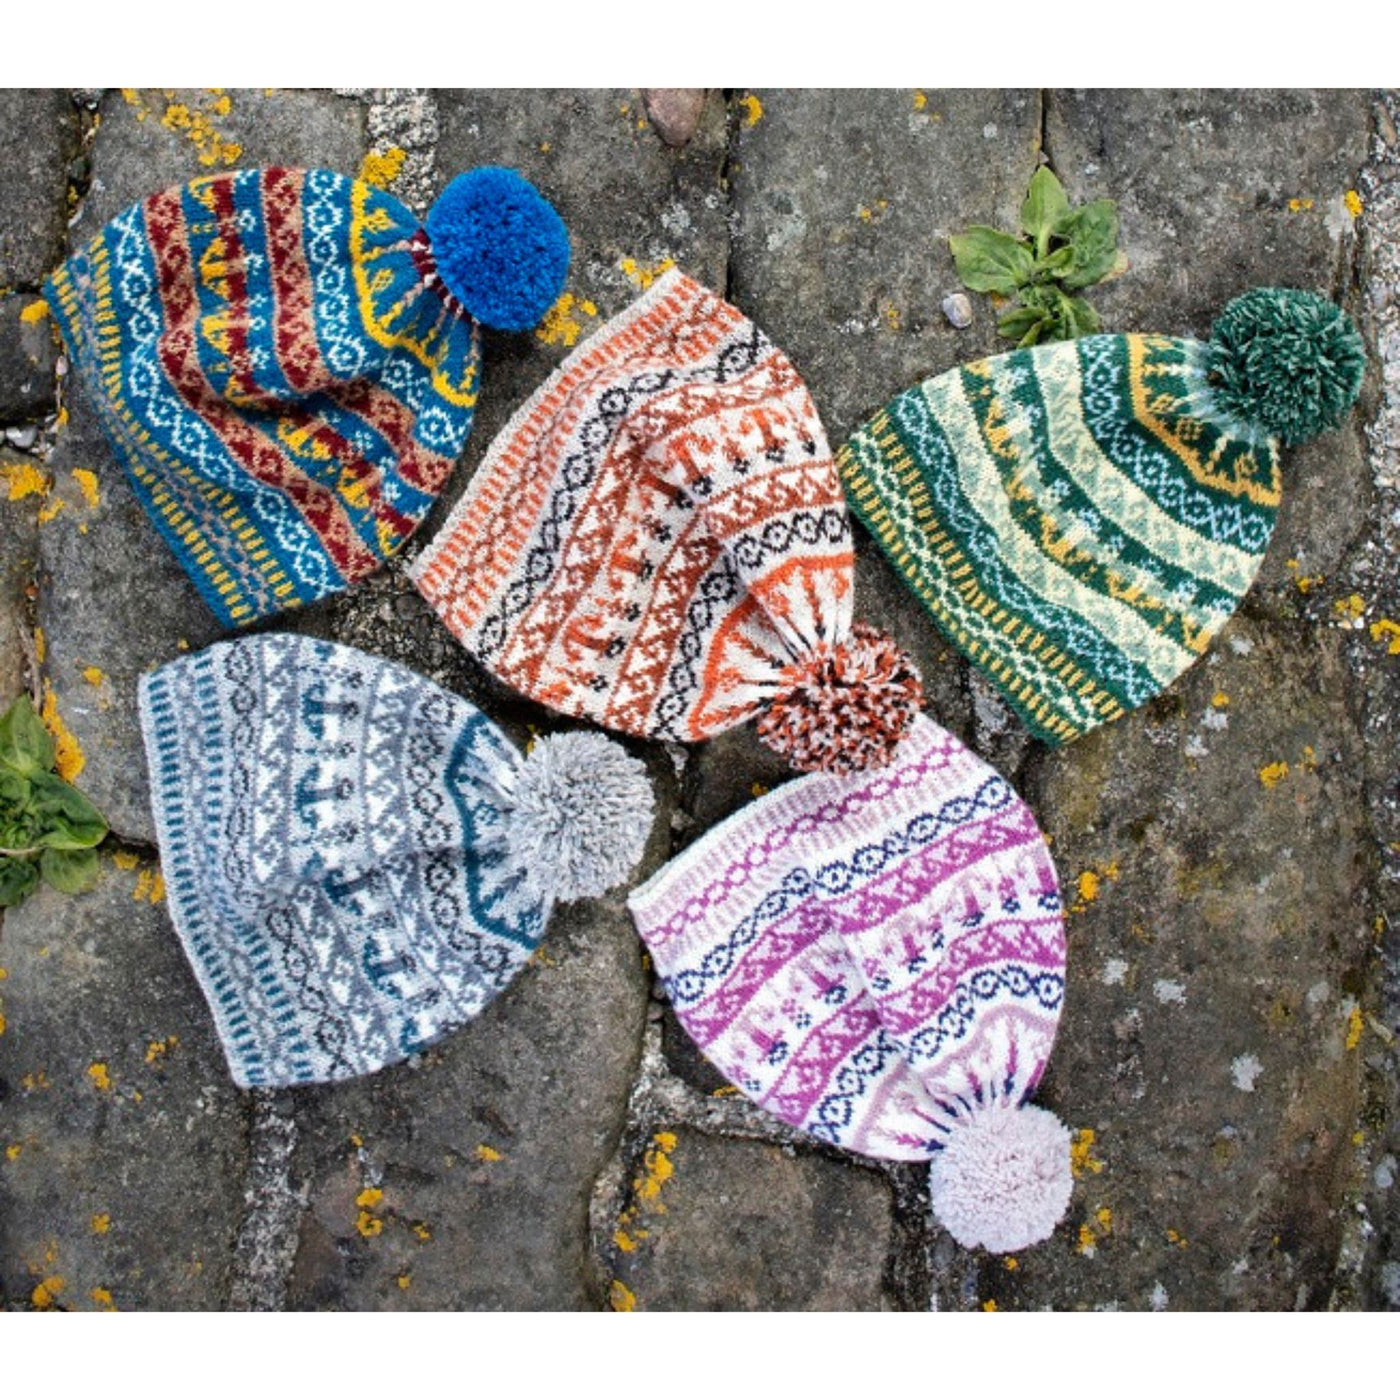 5 Bonnie Isle Hats knit in 5 different colorways are lying on rocks.